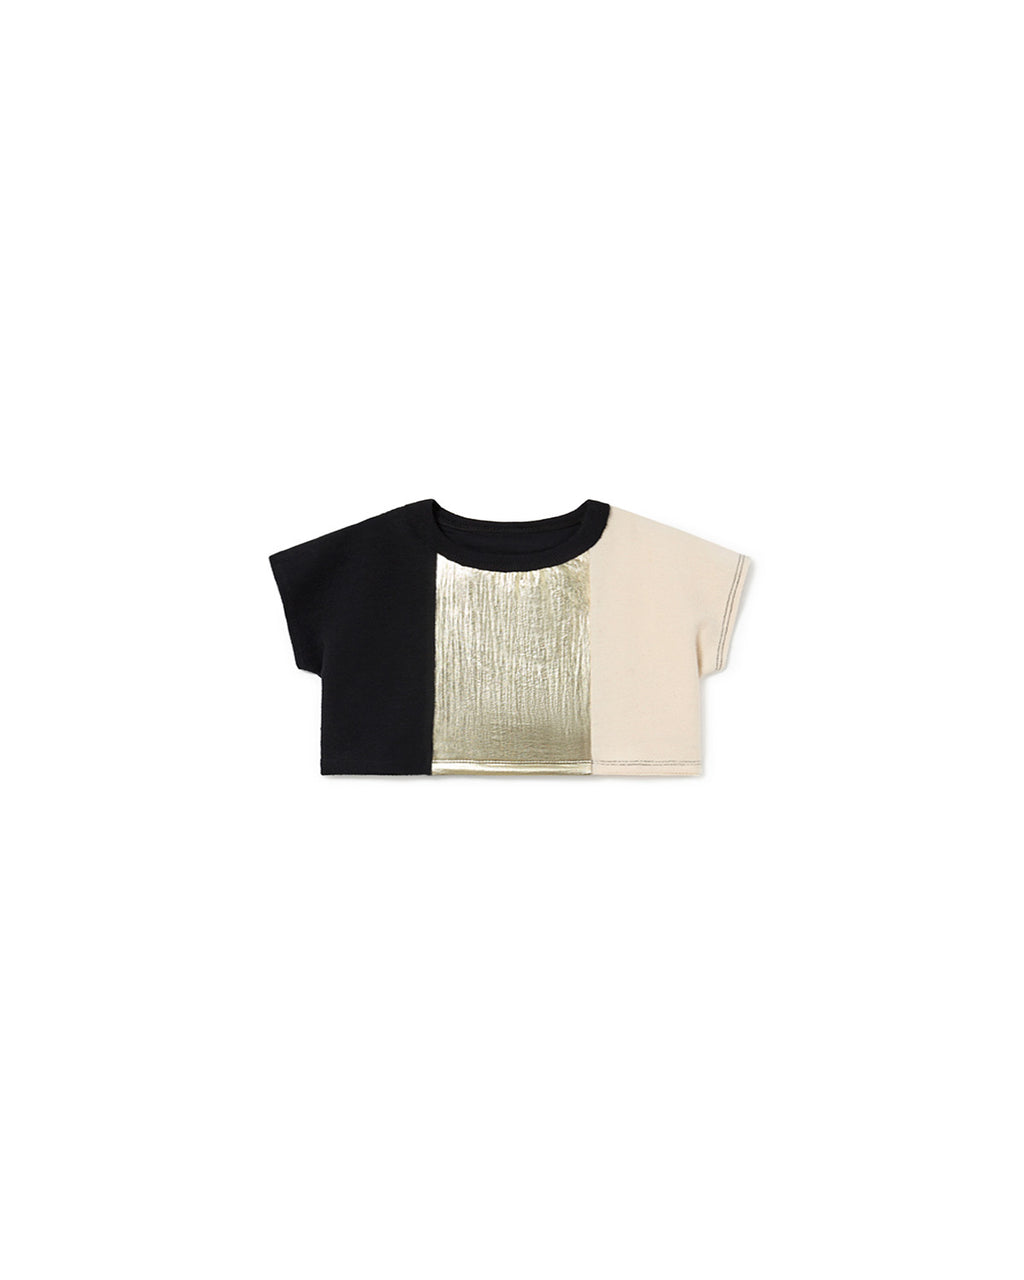 Little Creative Factory Shave Ice Crop Top - Cream Gold Black